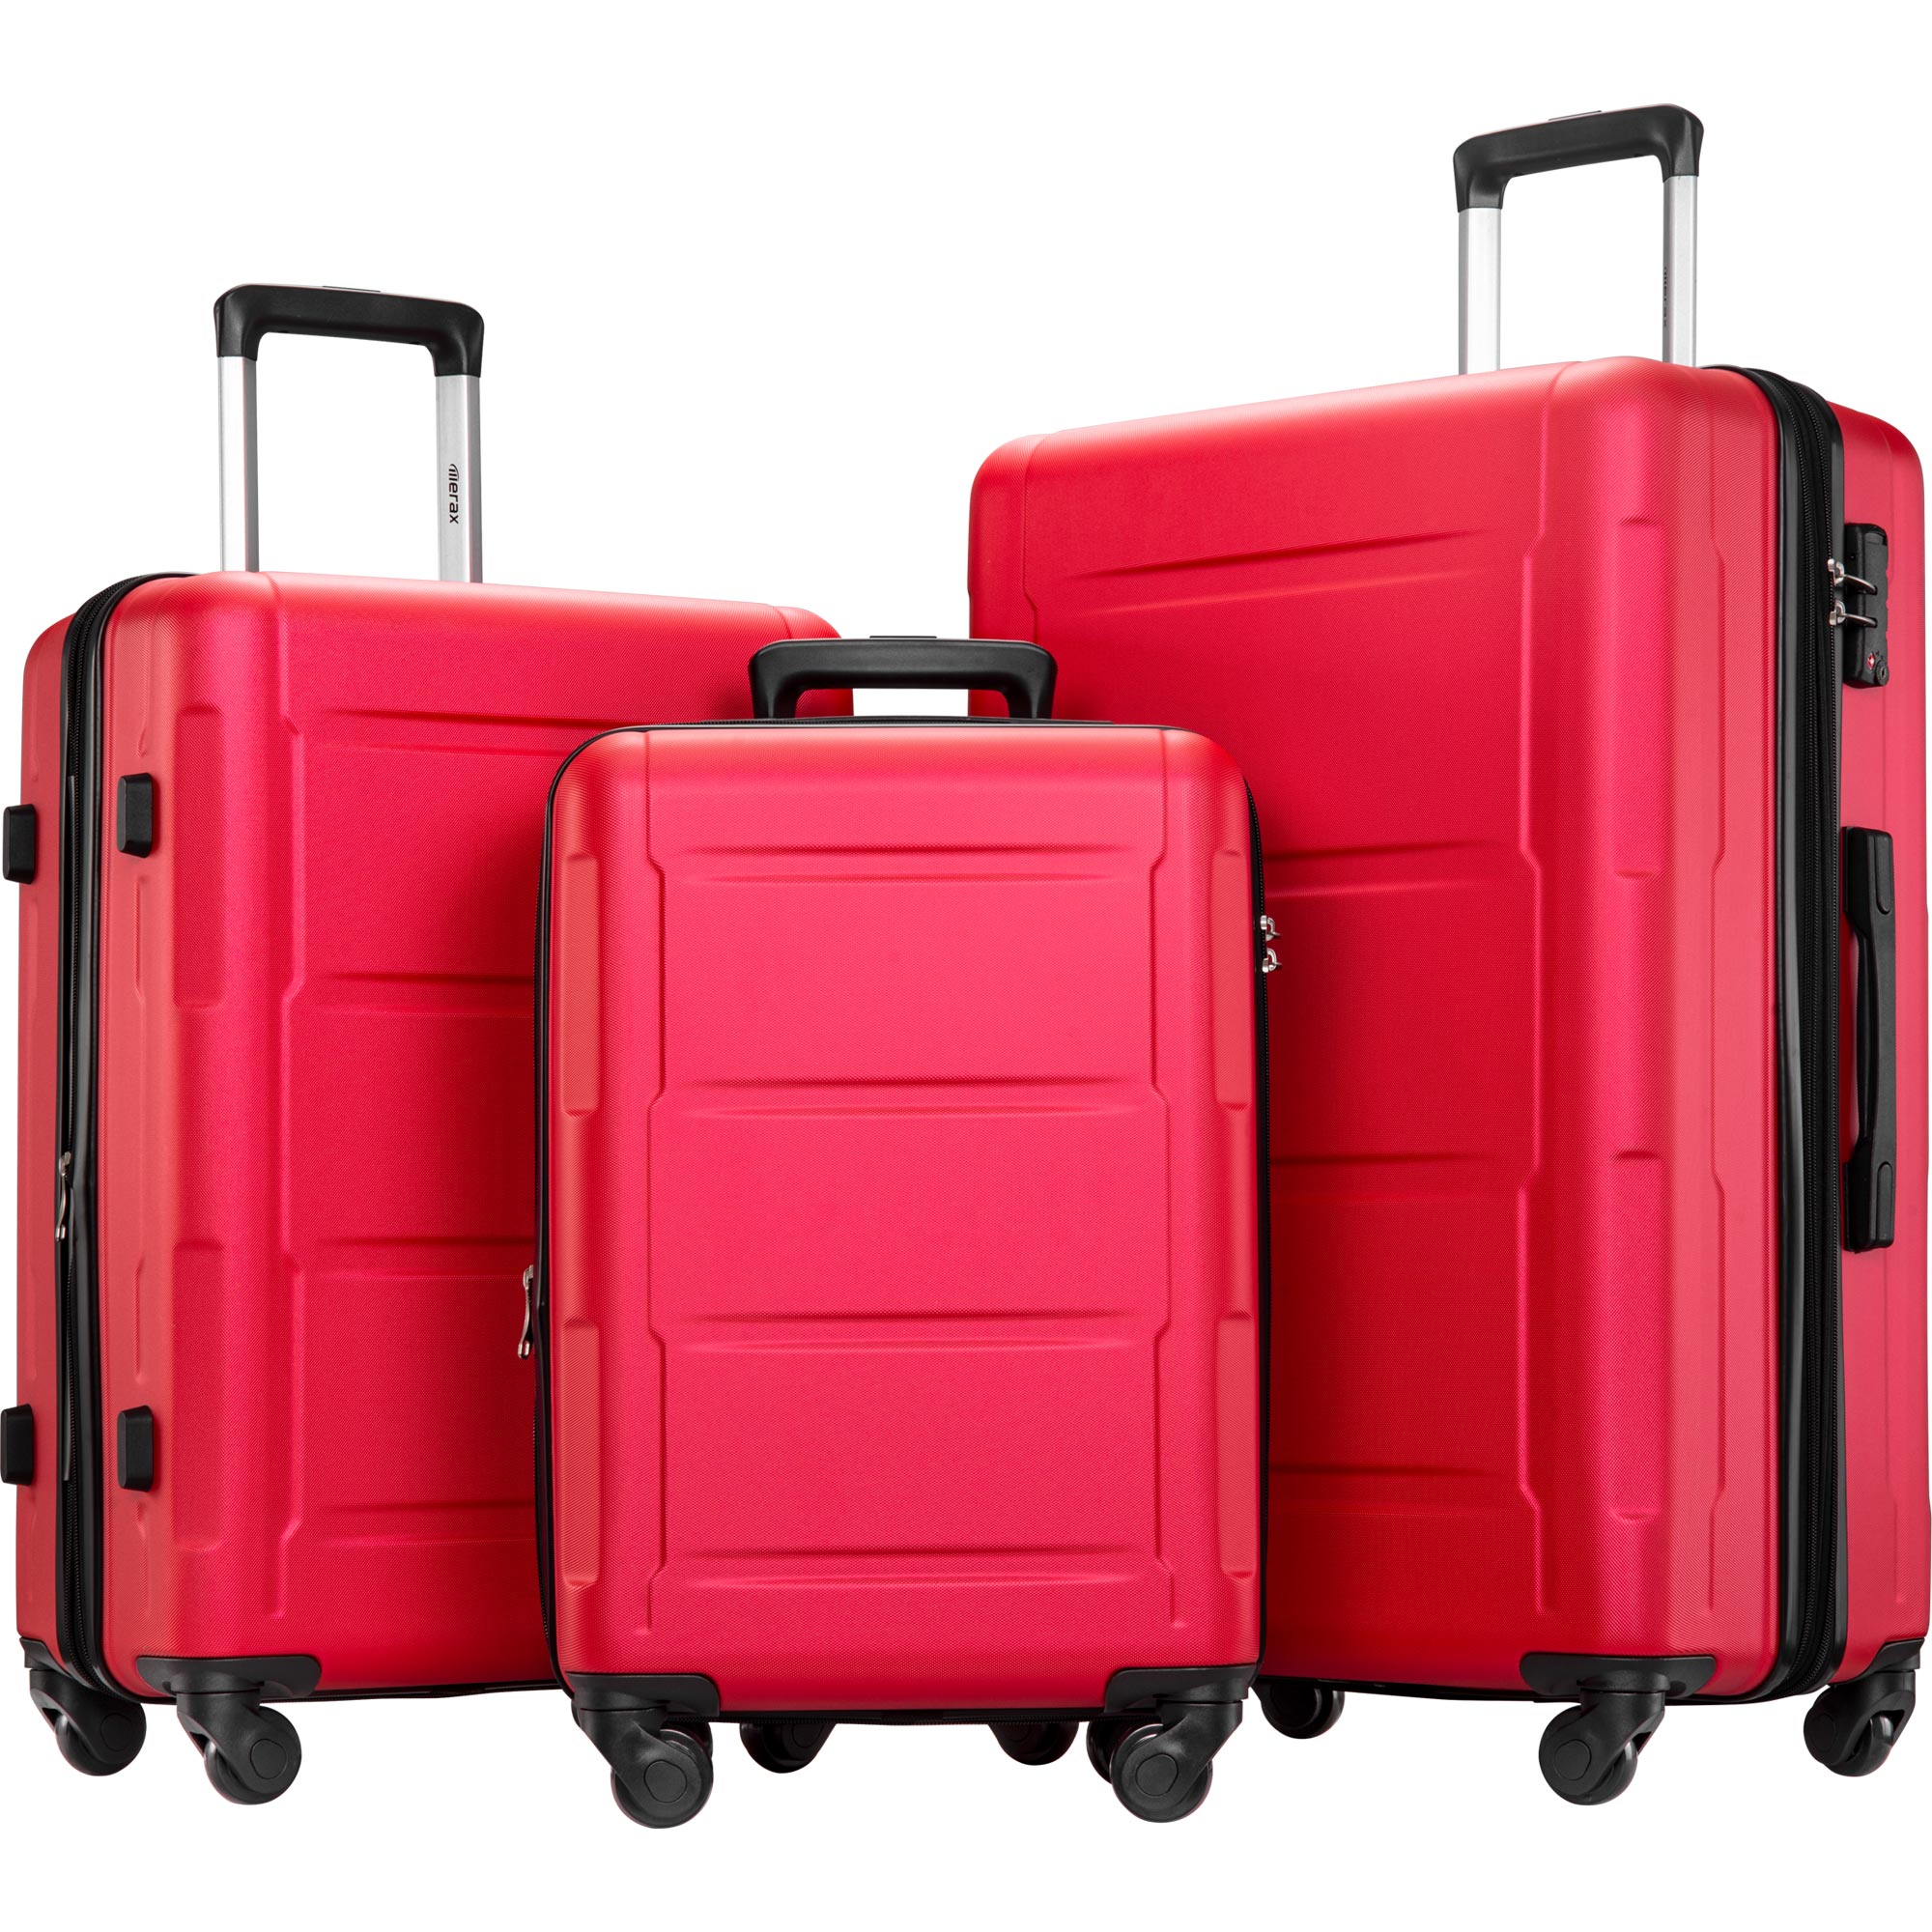 SEGMART Expandable Luggage Sets of 3, 3-Piece Lightweight Hardside 4-Wheel Spinner Luggage Set: 20"/ 24''/ 28" Carry-On Checked Suitcase, Carry on Suitcase with TSA Lock for Traveling, Red, S6564 - image 1 of 8